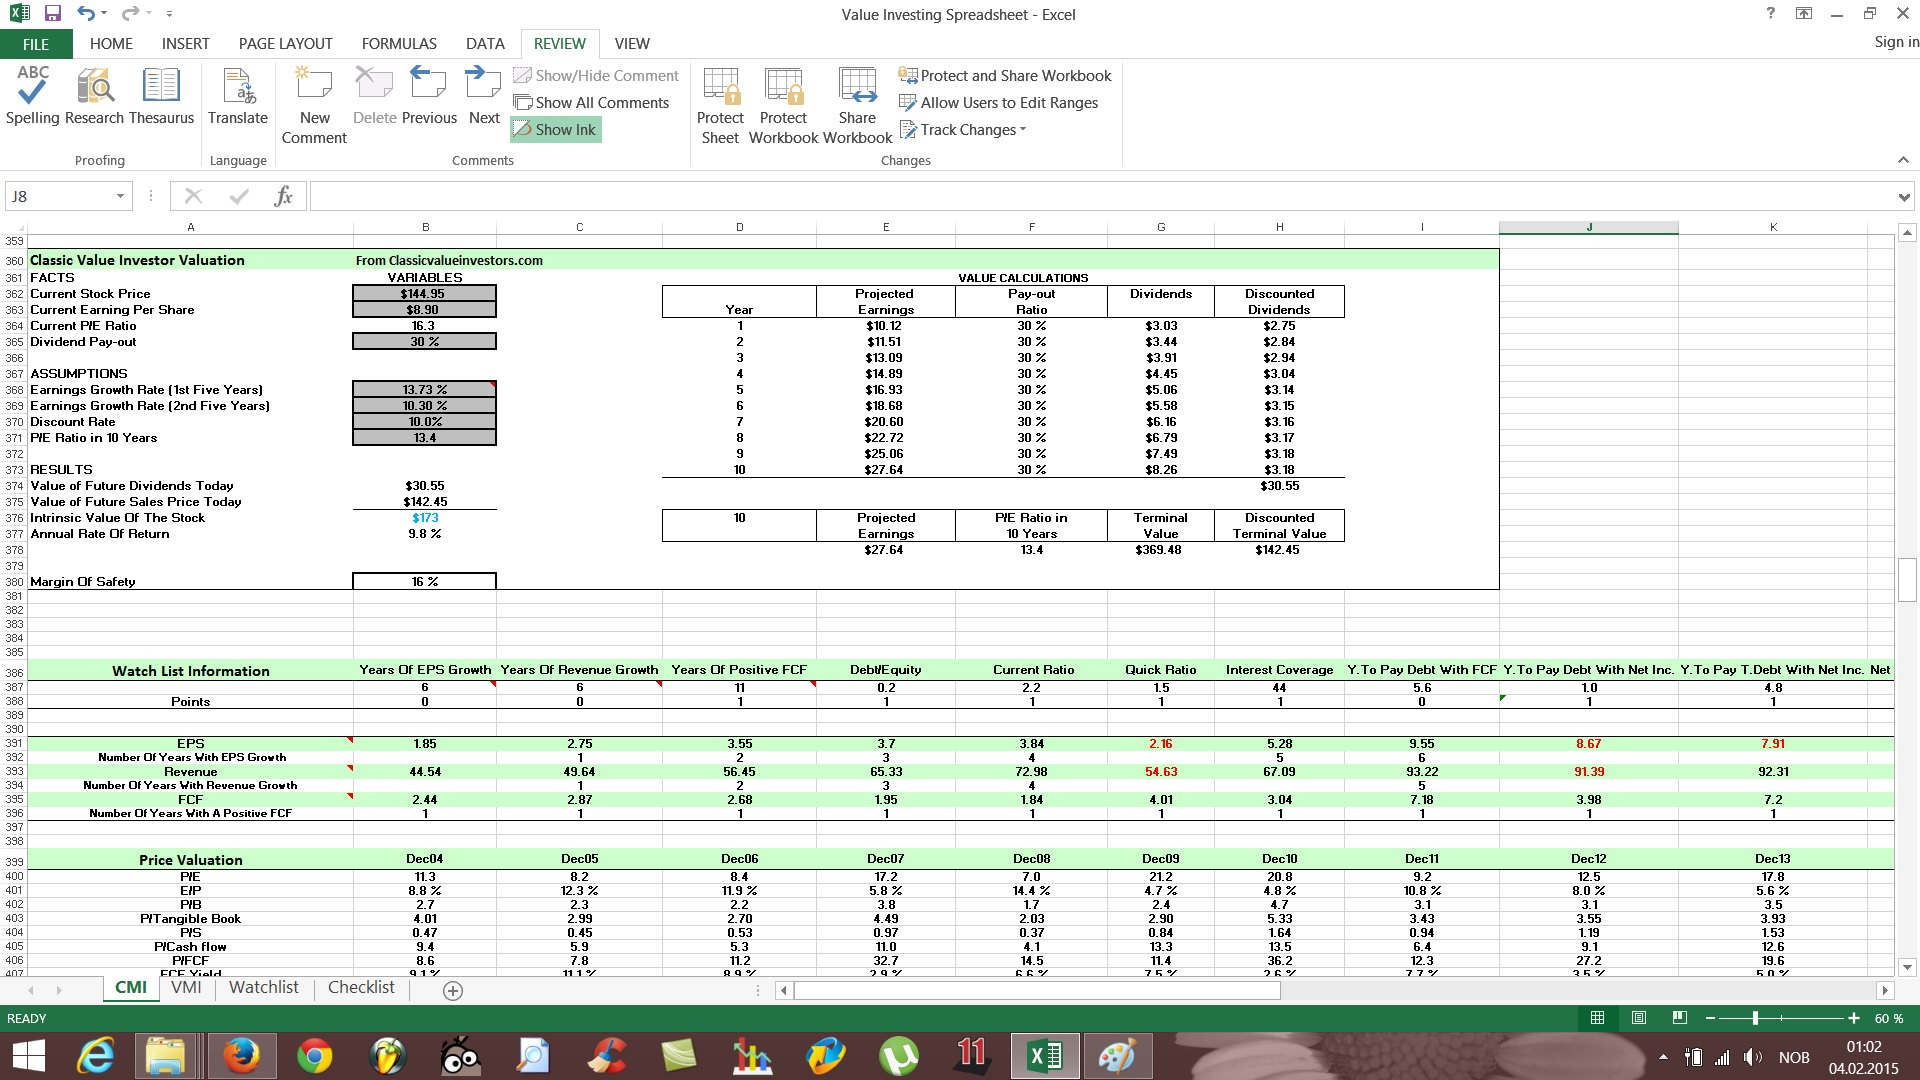 Rule 1 Investing Spreadsheet with regard to Rule 1 Investing Spreadsheet Download  Laobing Kaisuo